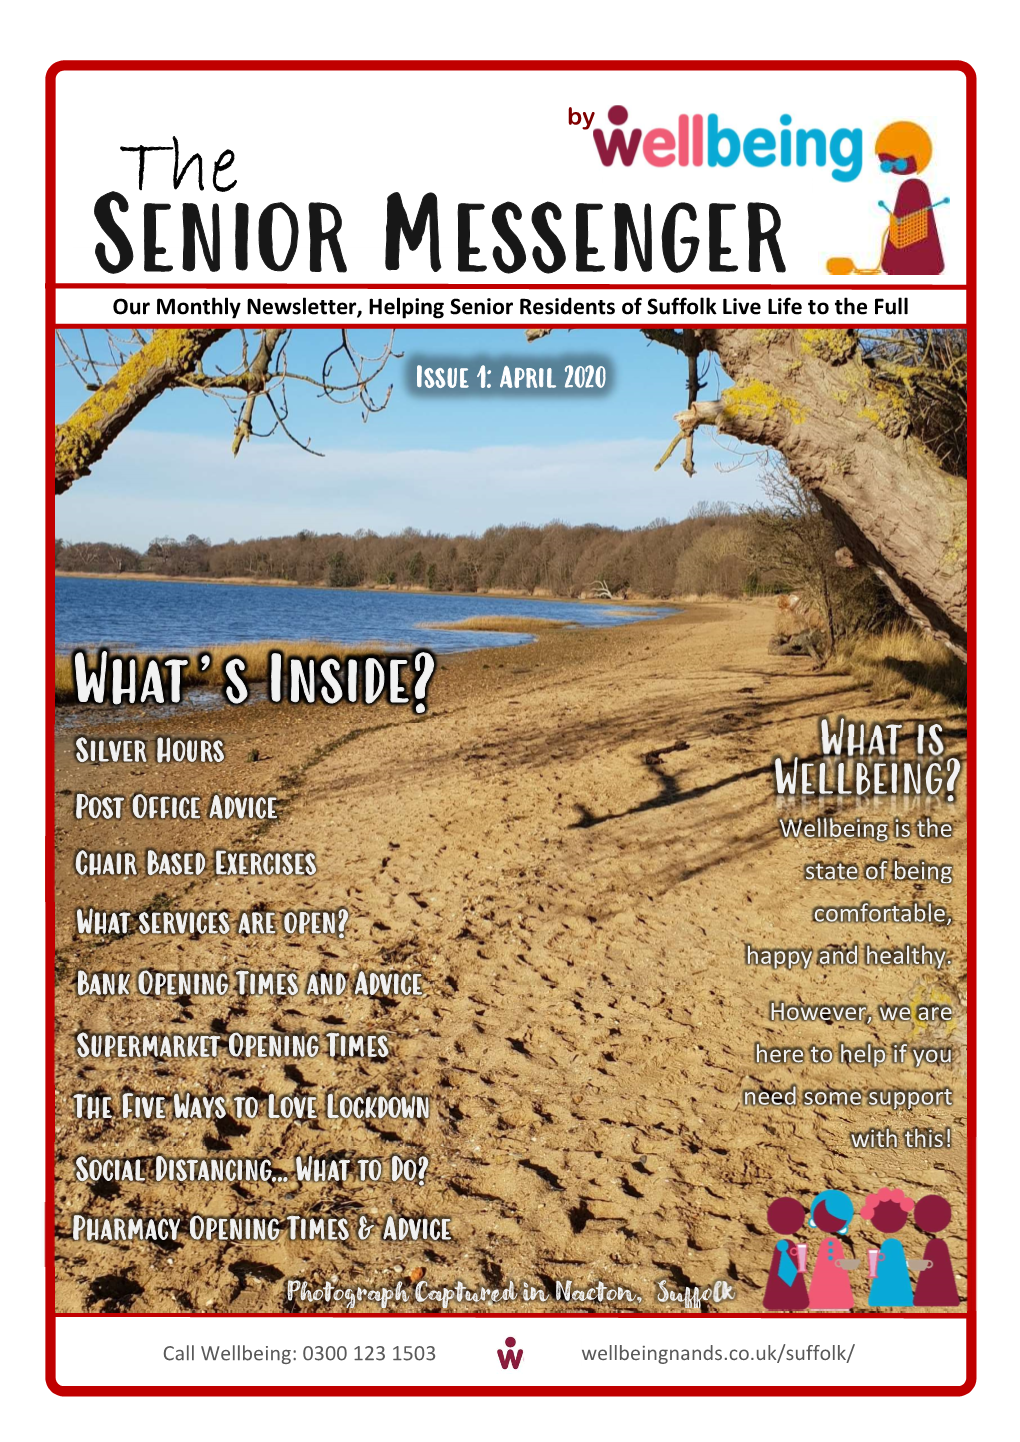 Senior Messenger Our Monthly Newsletter, Helping Senior Residents of Suffolk Live Life to the Full